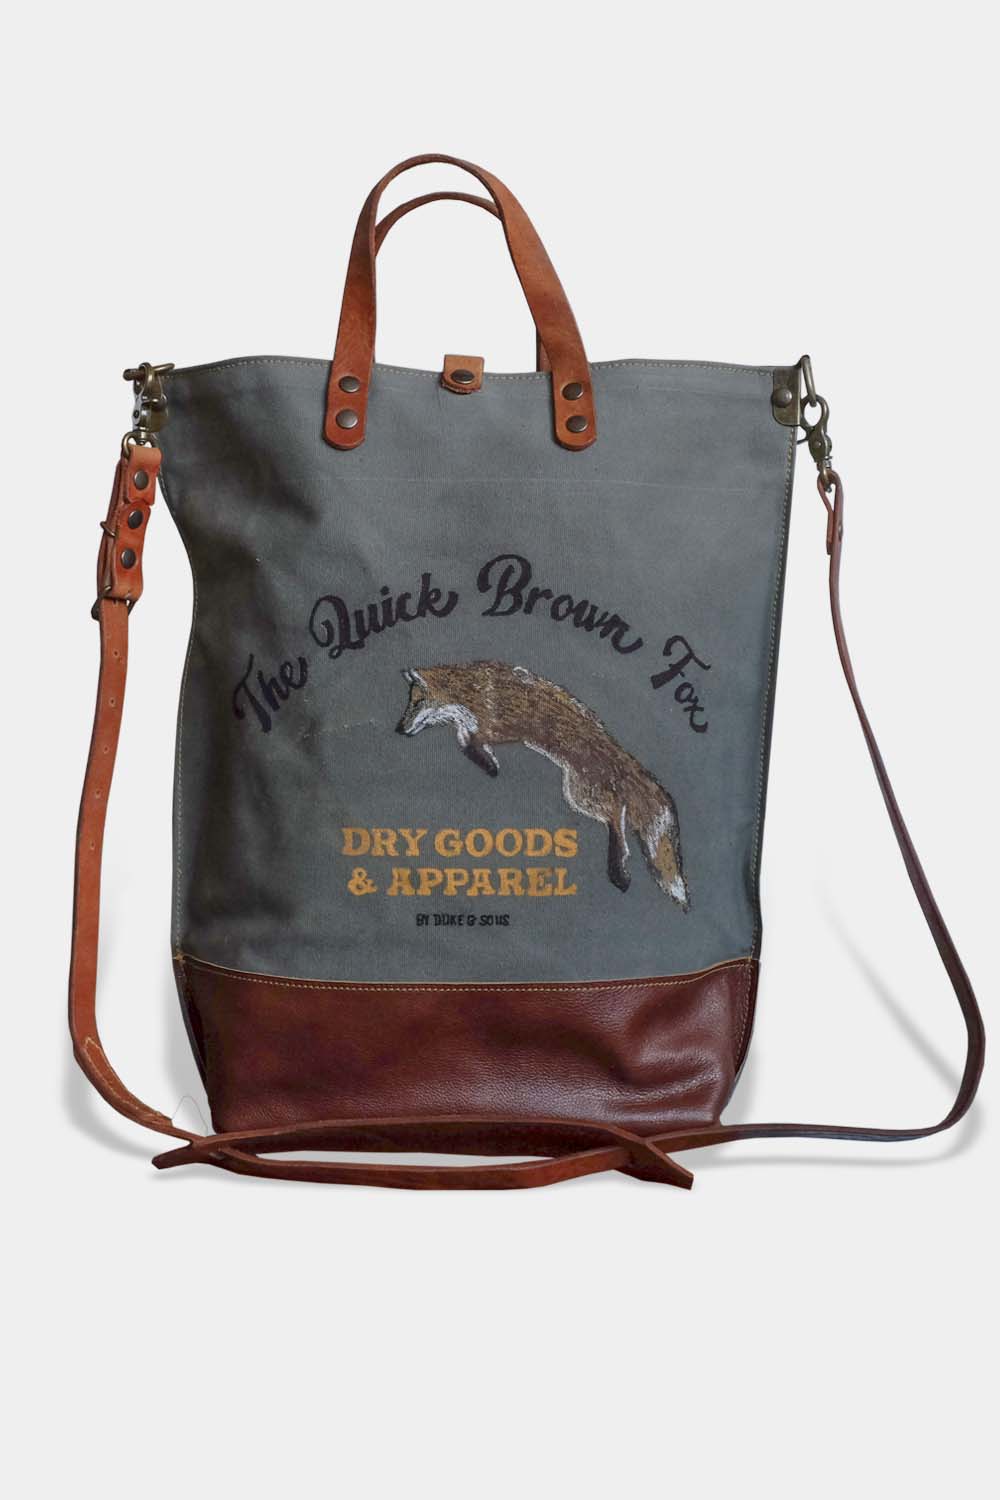 Art bag, The Quick Brown Fox tote bag, olive green canvas, hand drawn.